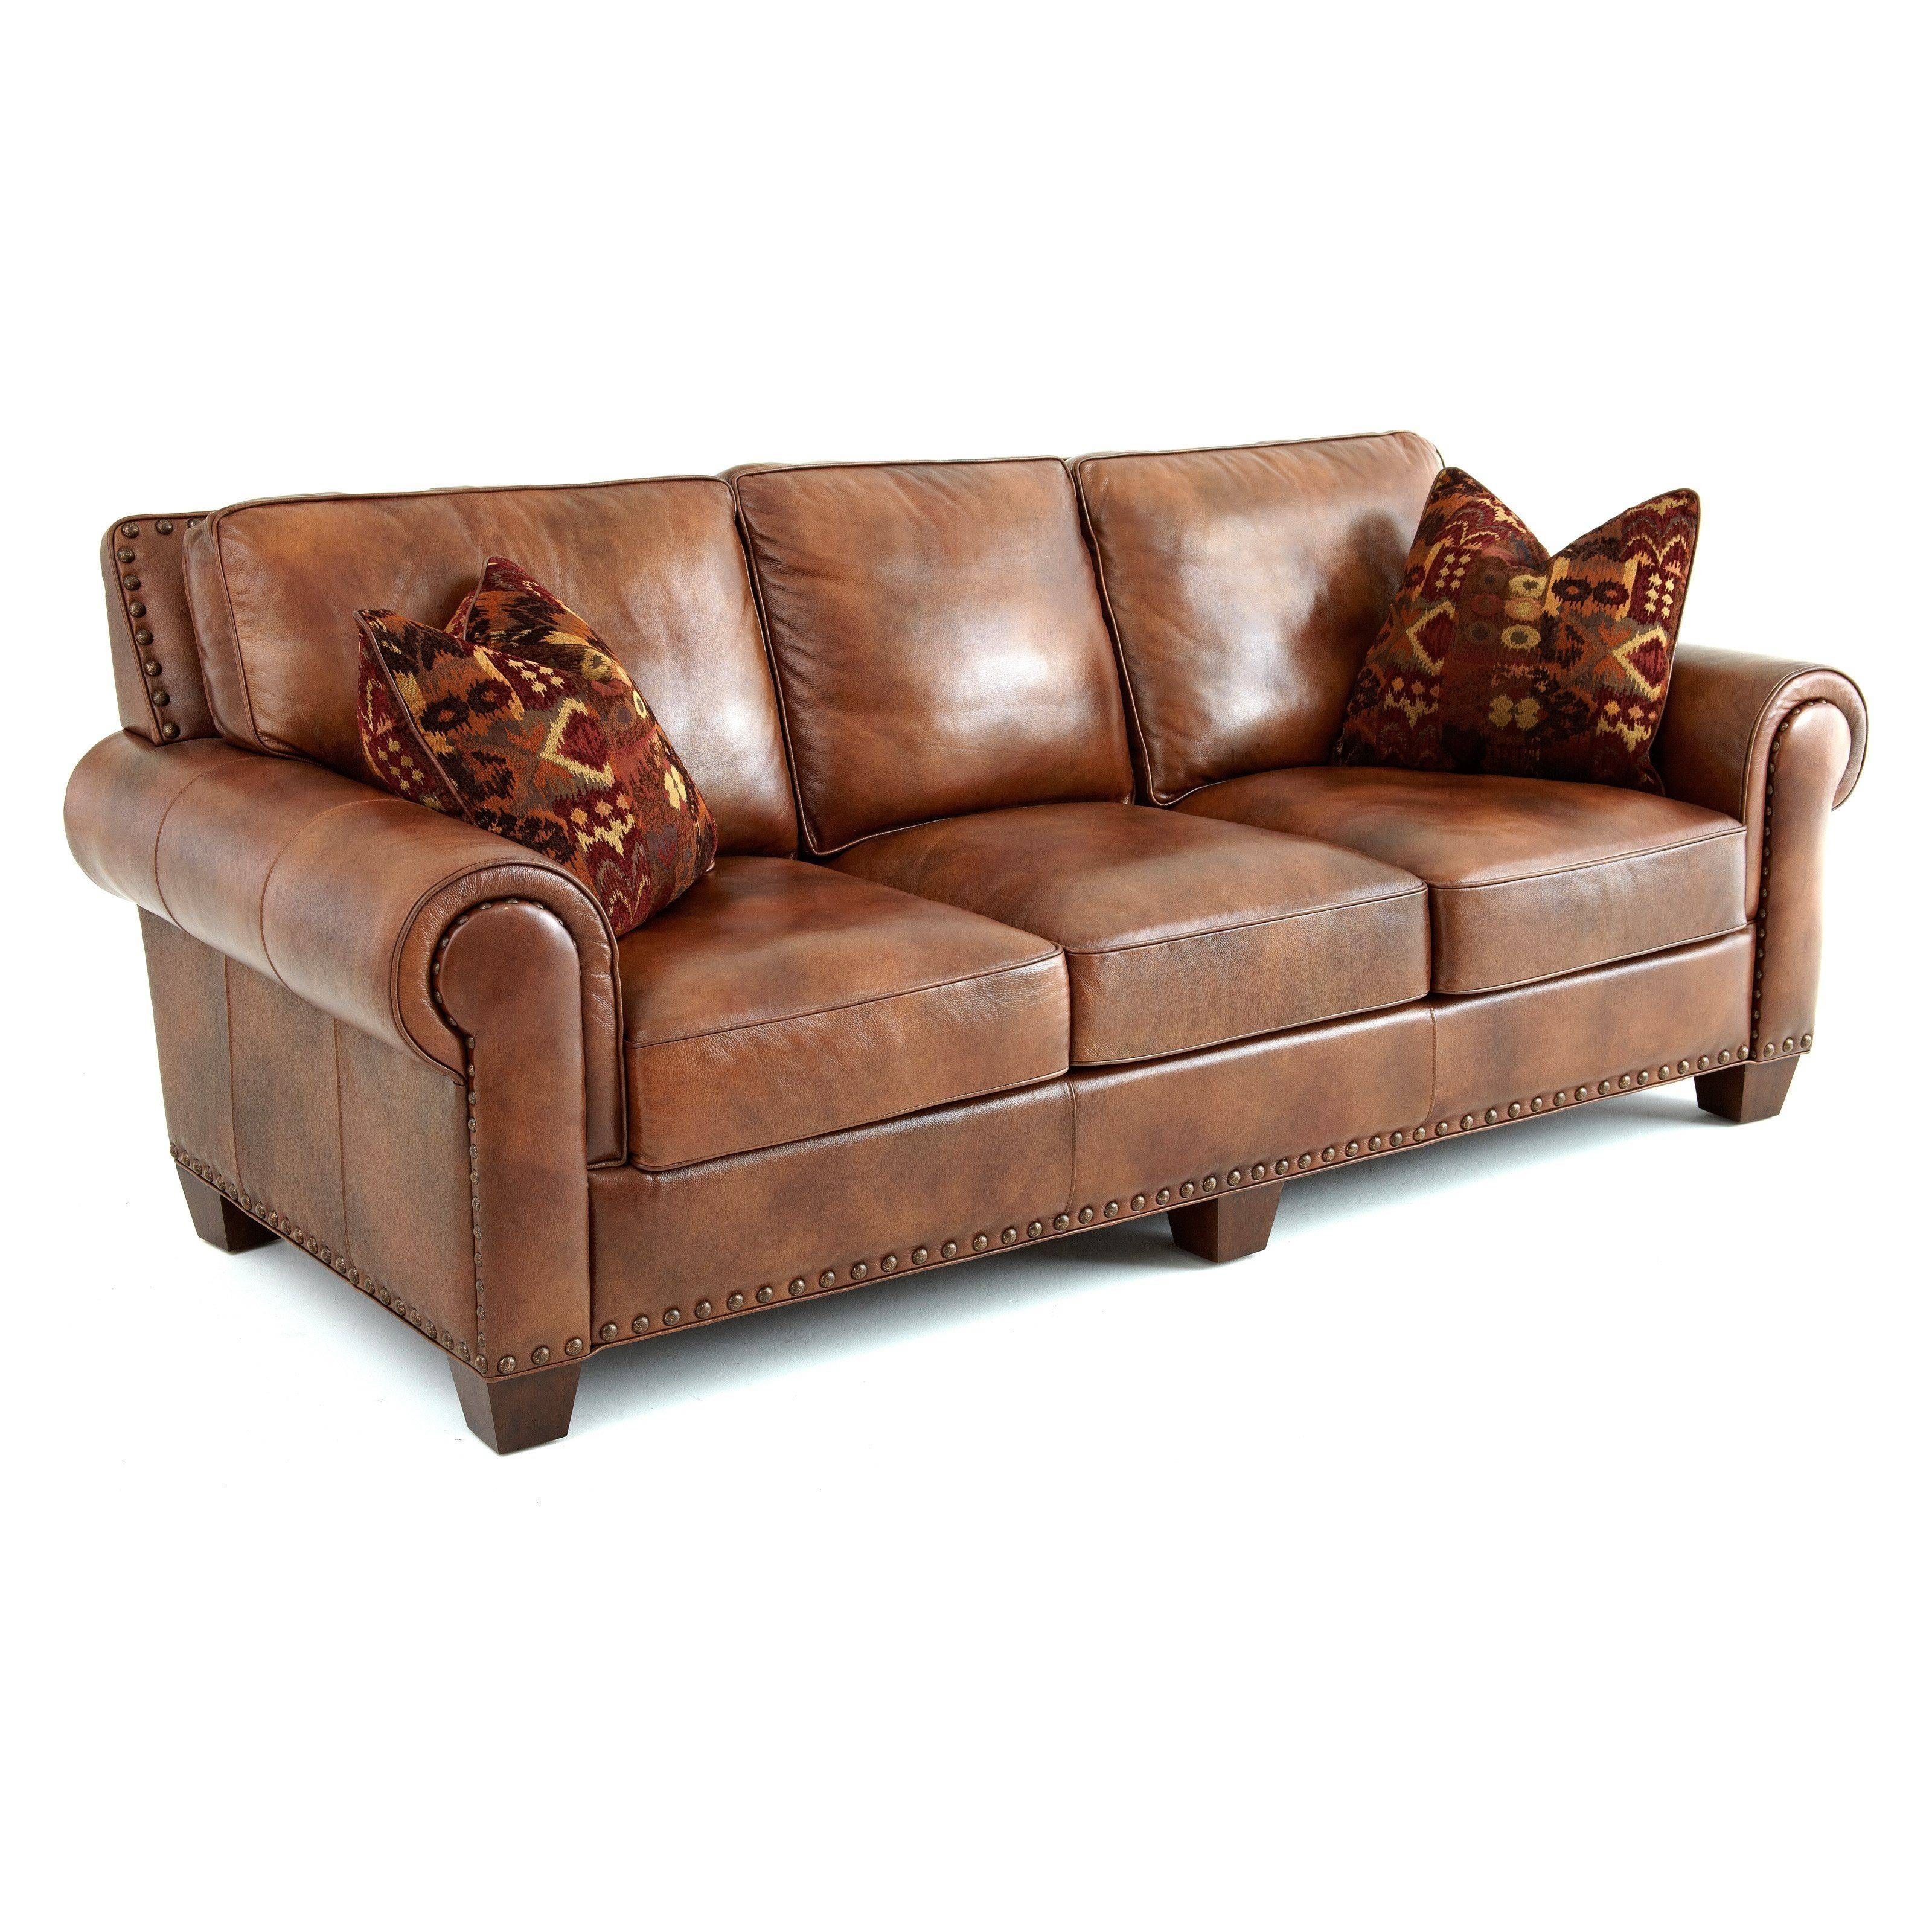 Sofas Center : Distressed Leather Sofa And Recliner Sectional Set Regarding Sofas For Dogs (View 8 of 30)